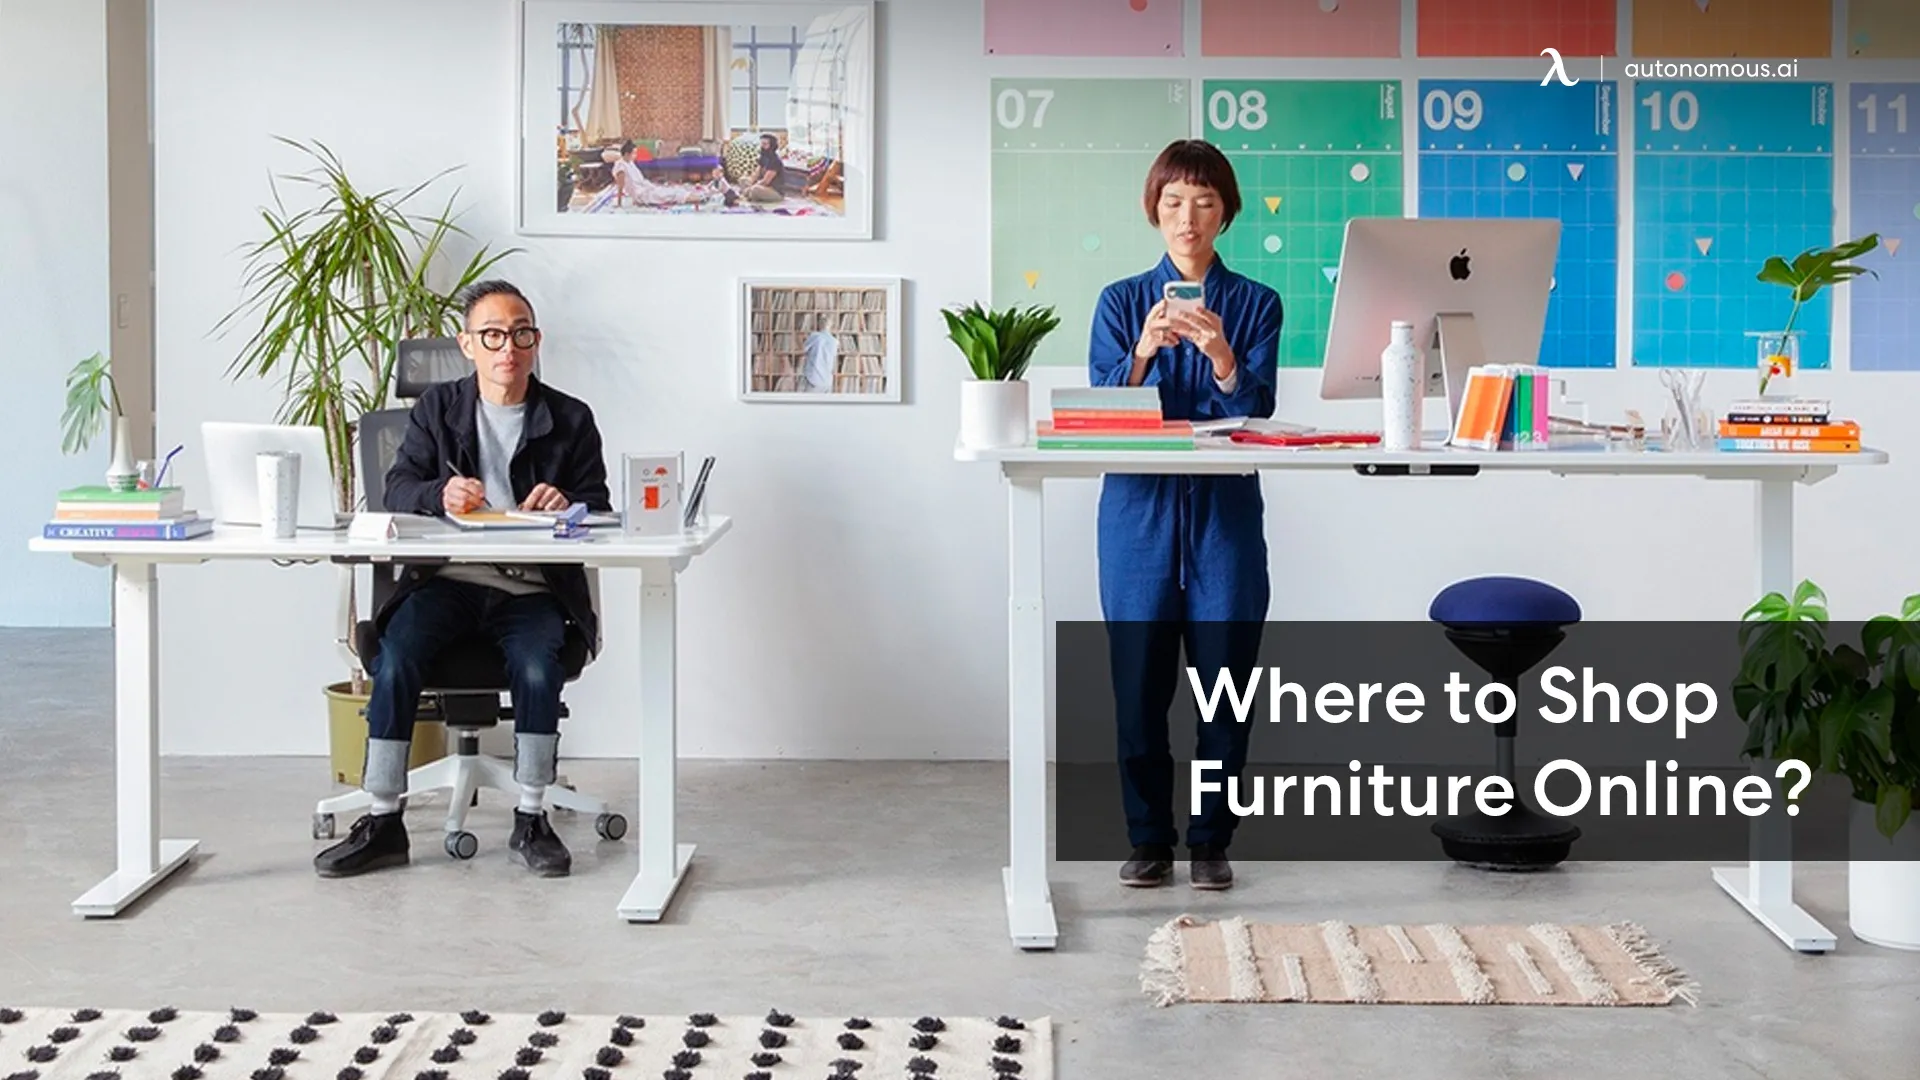 What Are the Best Online Furniture Places to Shop Right Now?